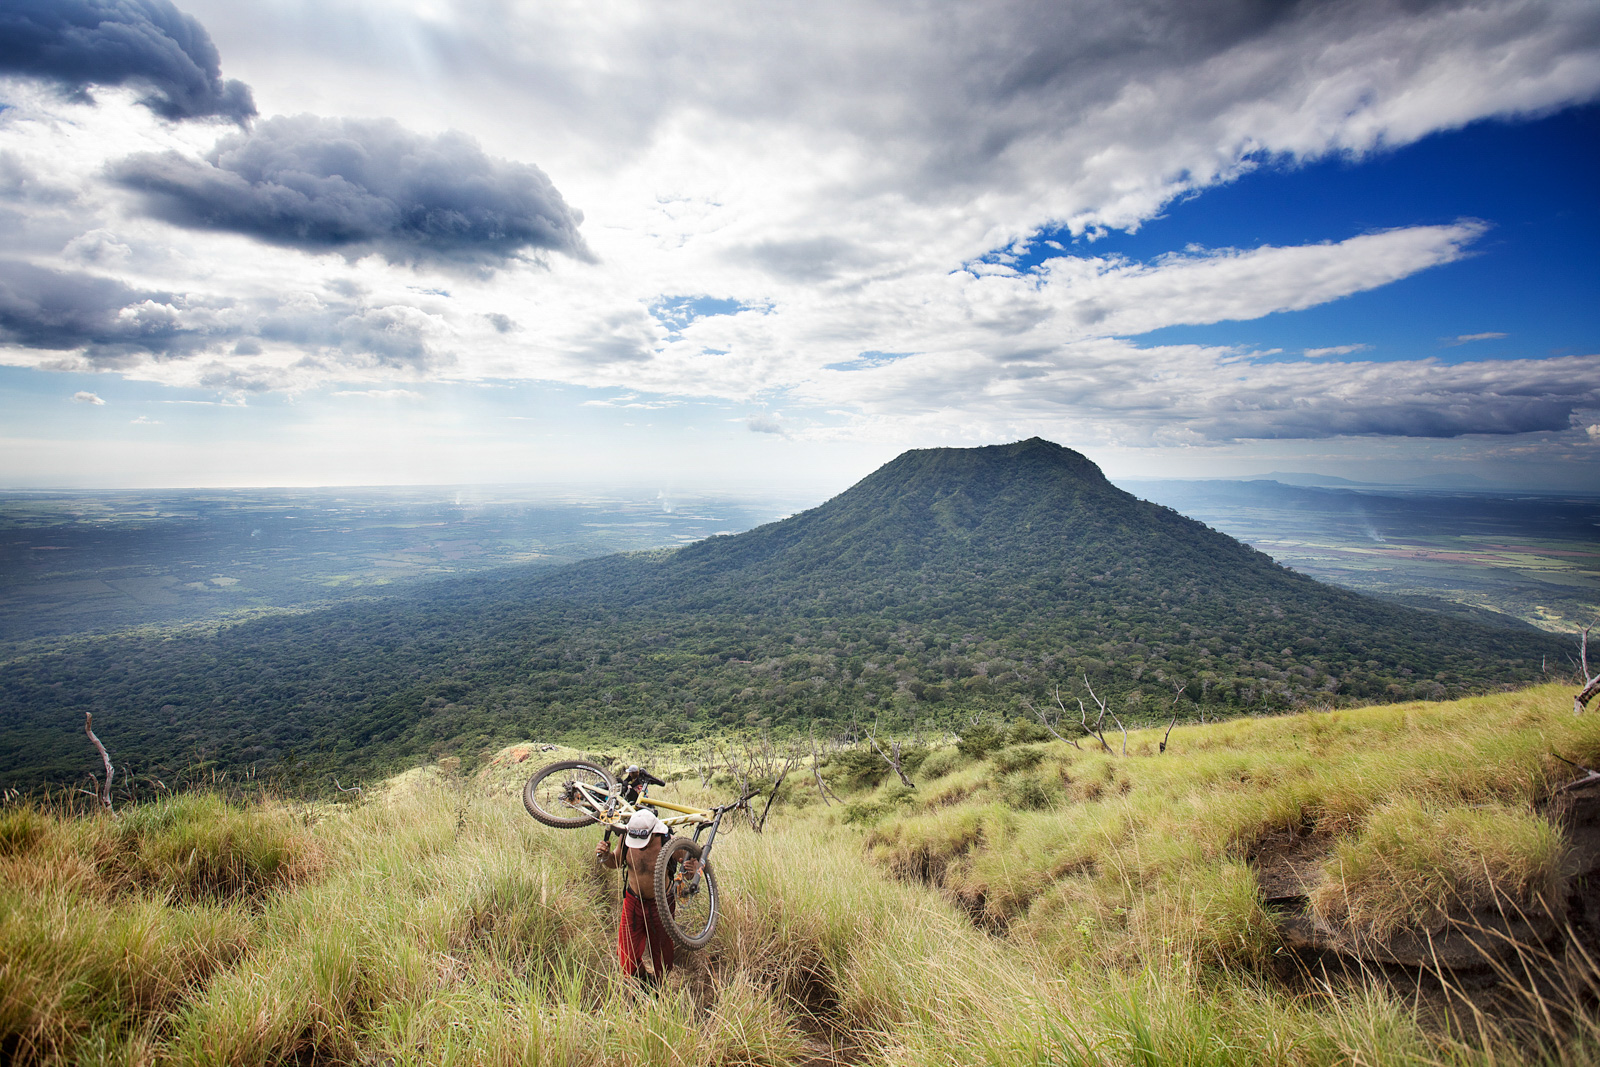 Volcanico mountain bike for Schwalbe and Flor De Cana by Boston based sports photographer Brian Nevins